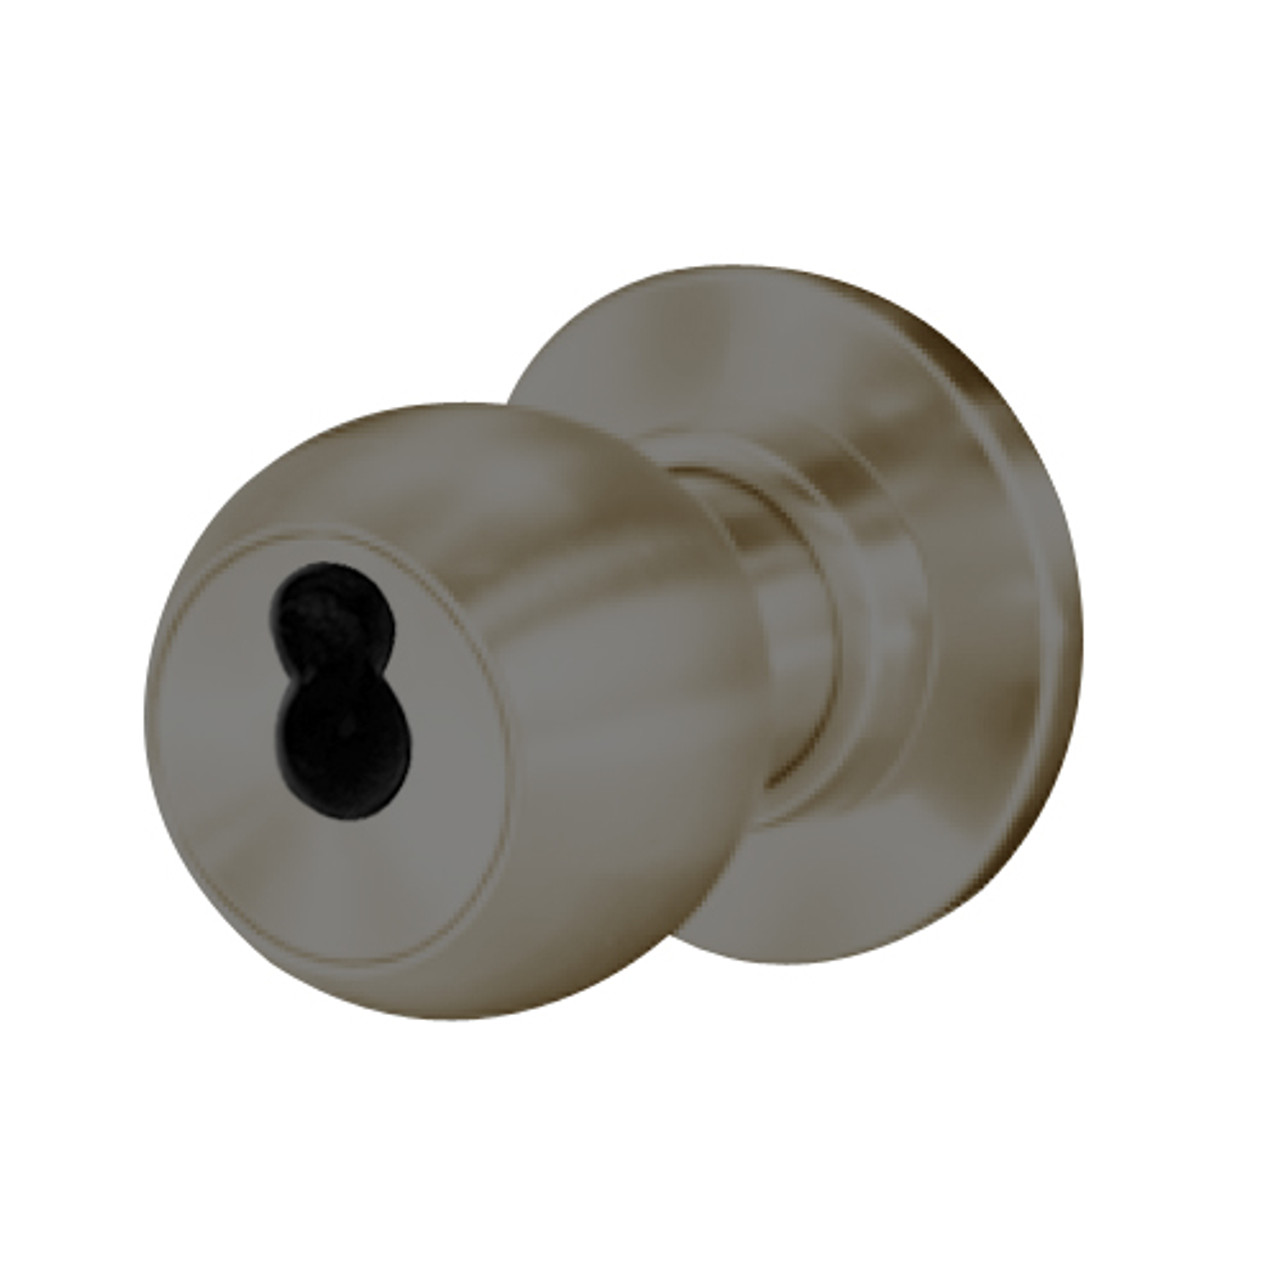 8K47YD4CSTK613 Best 8K Series Exit Heavy Duty Cylindrical Knob Locks with Round Style in Oil Rubbed Bronze